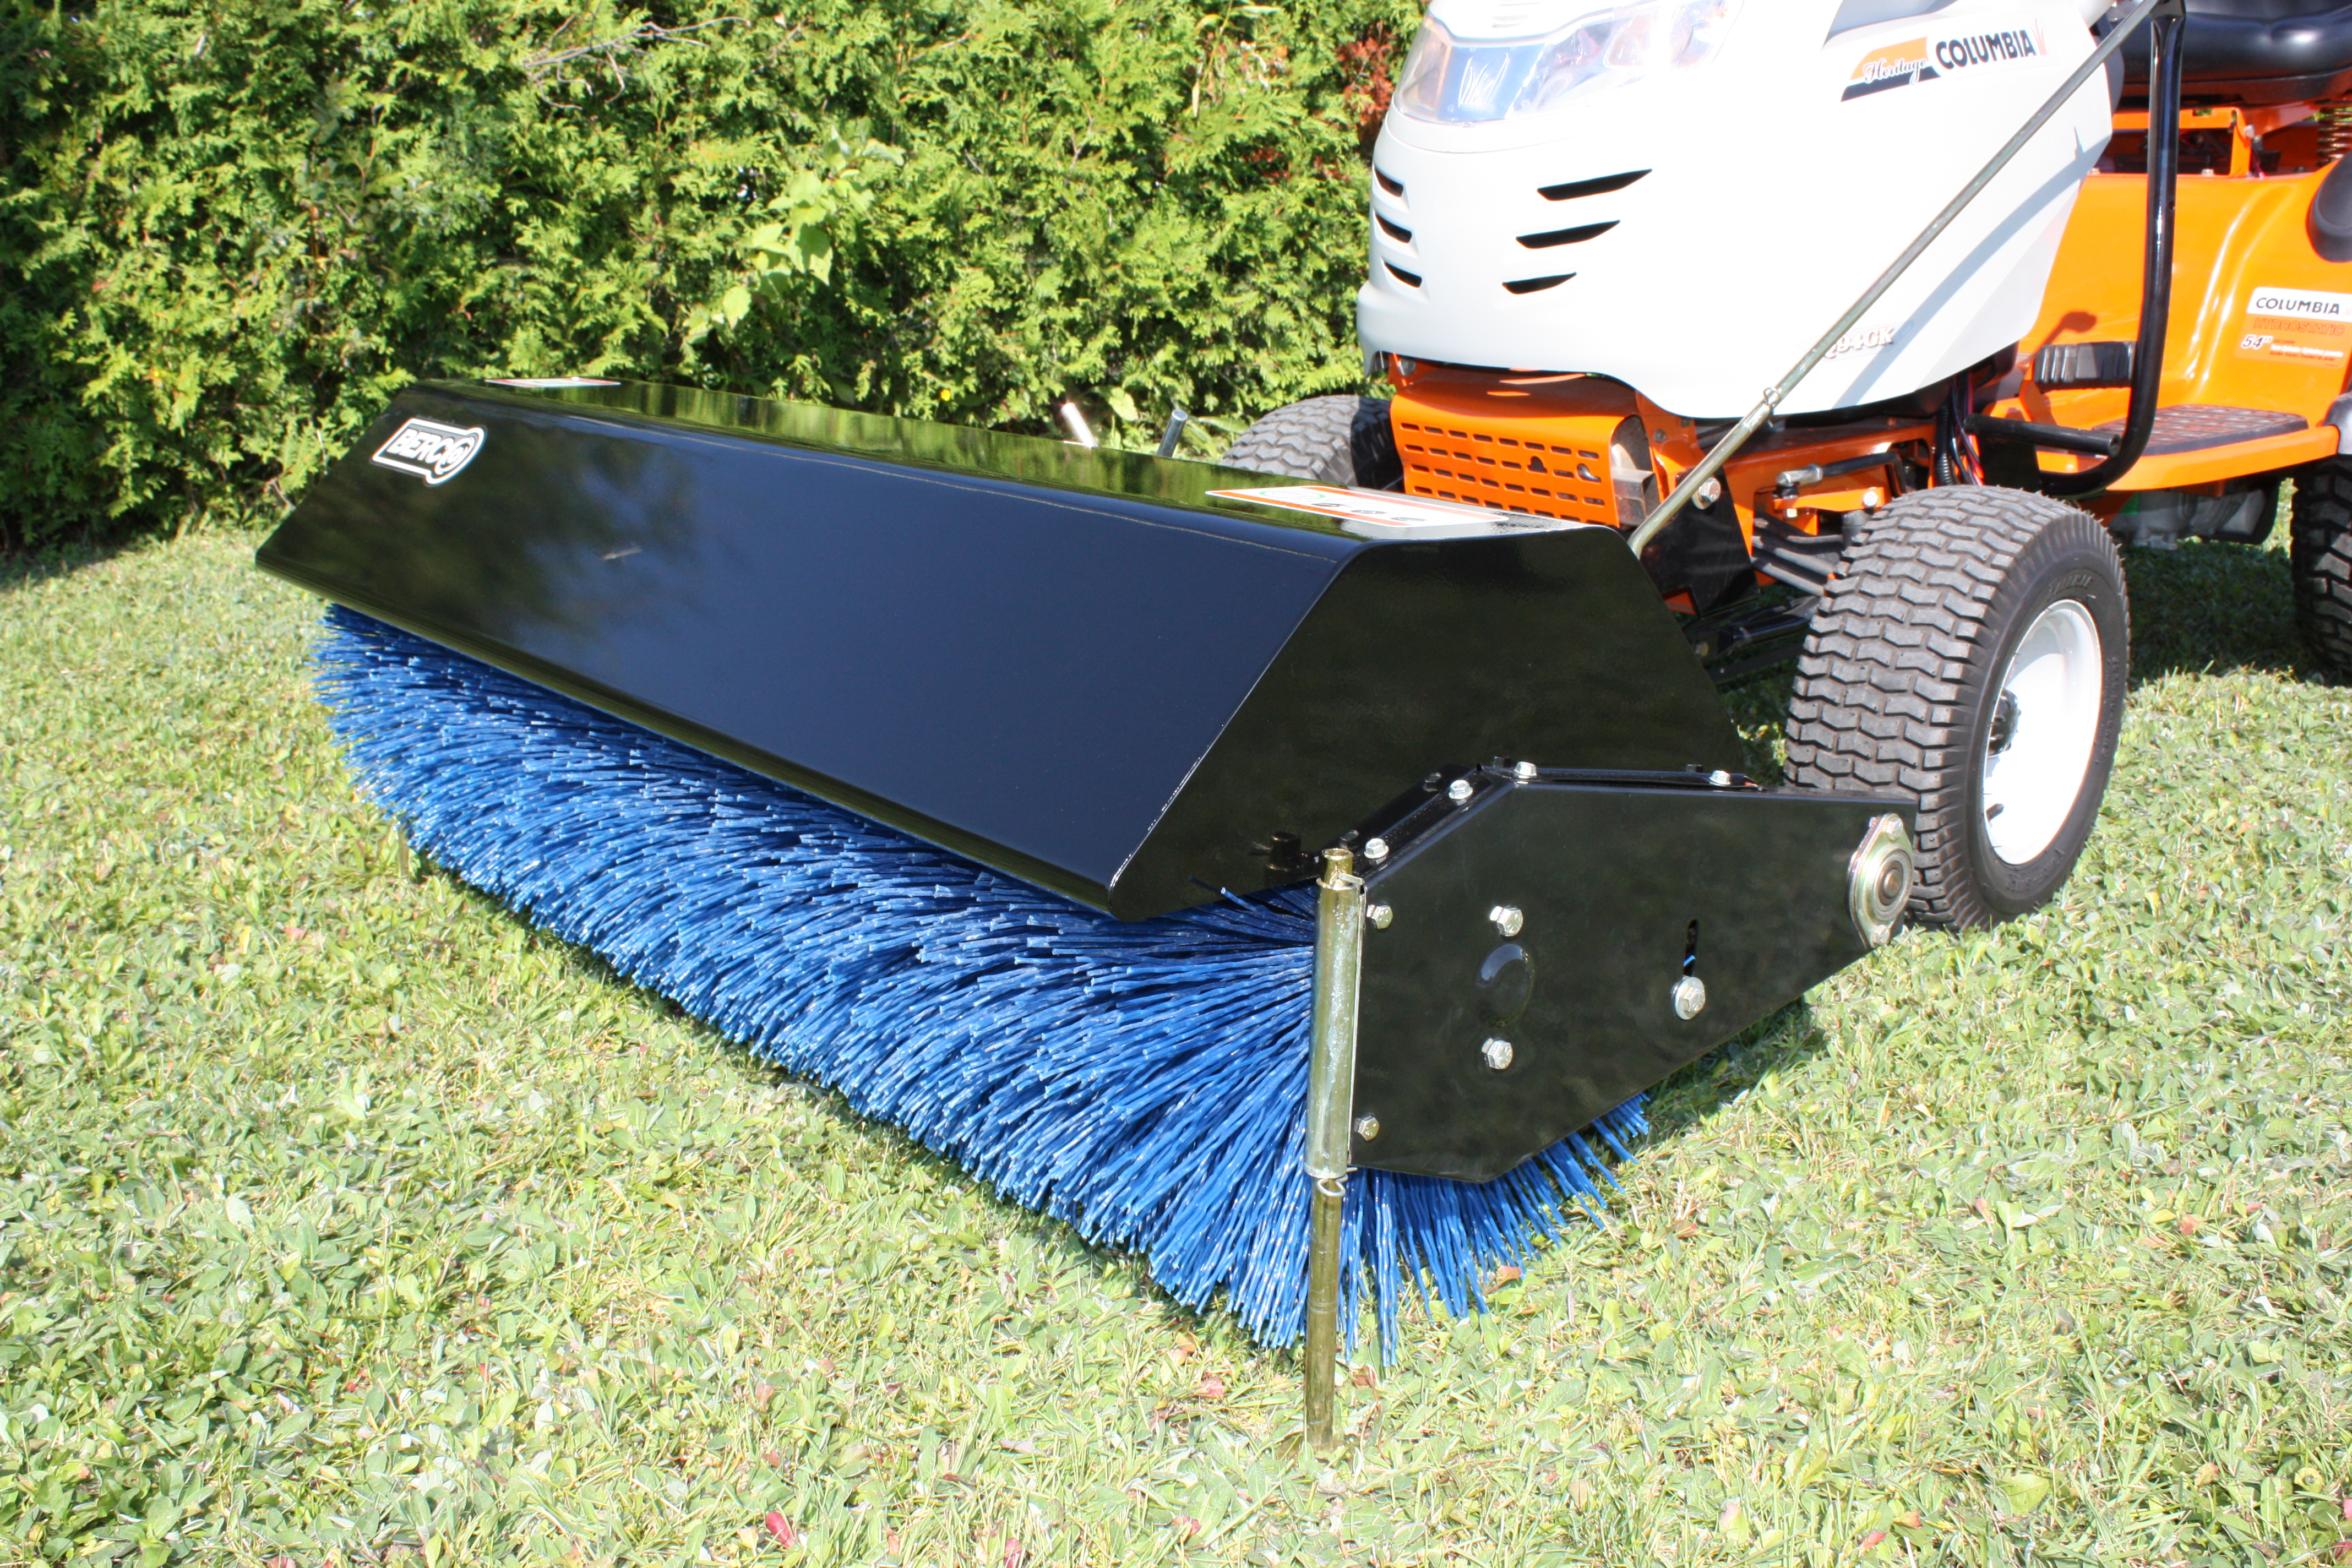 48" Rotary Broom for Lawn and Garden Tractors